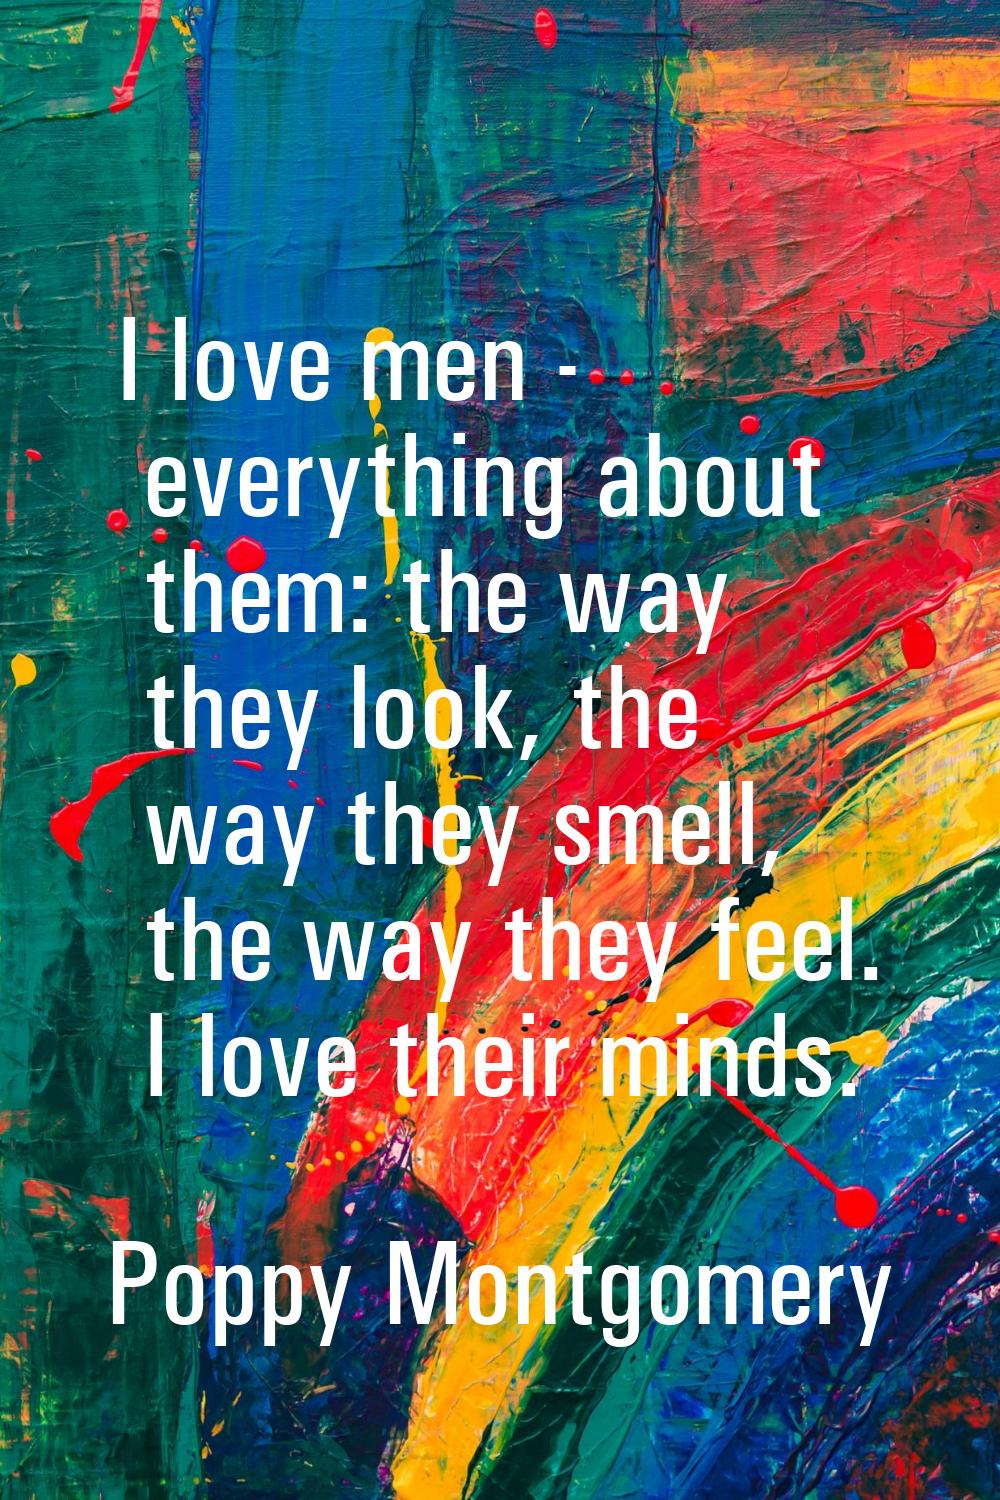 I love men - everything about them: the way they look, the way they smell, the way they feel. I lov